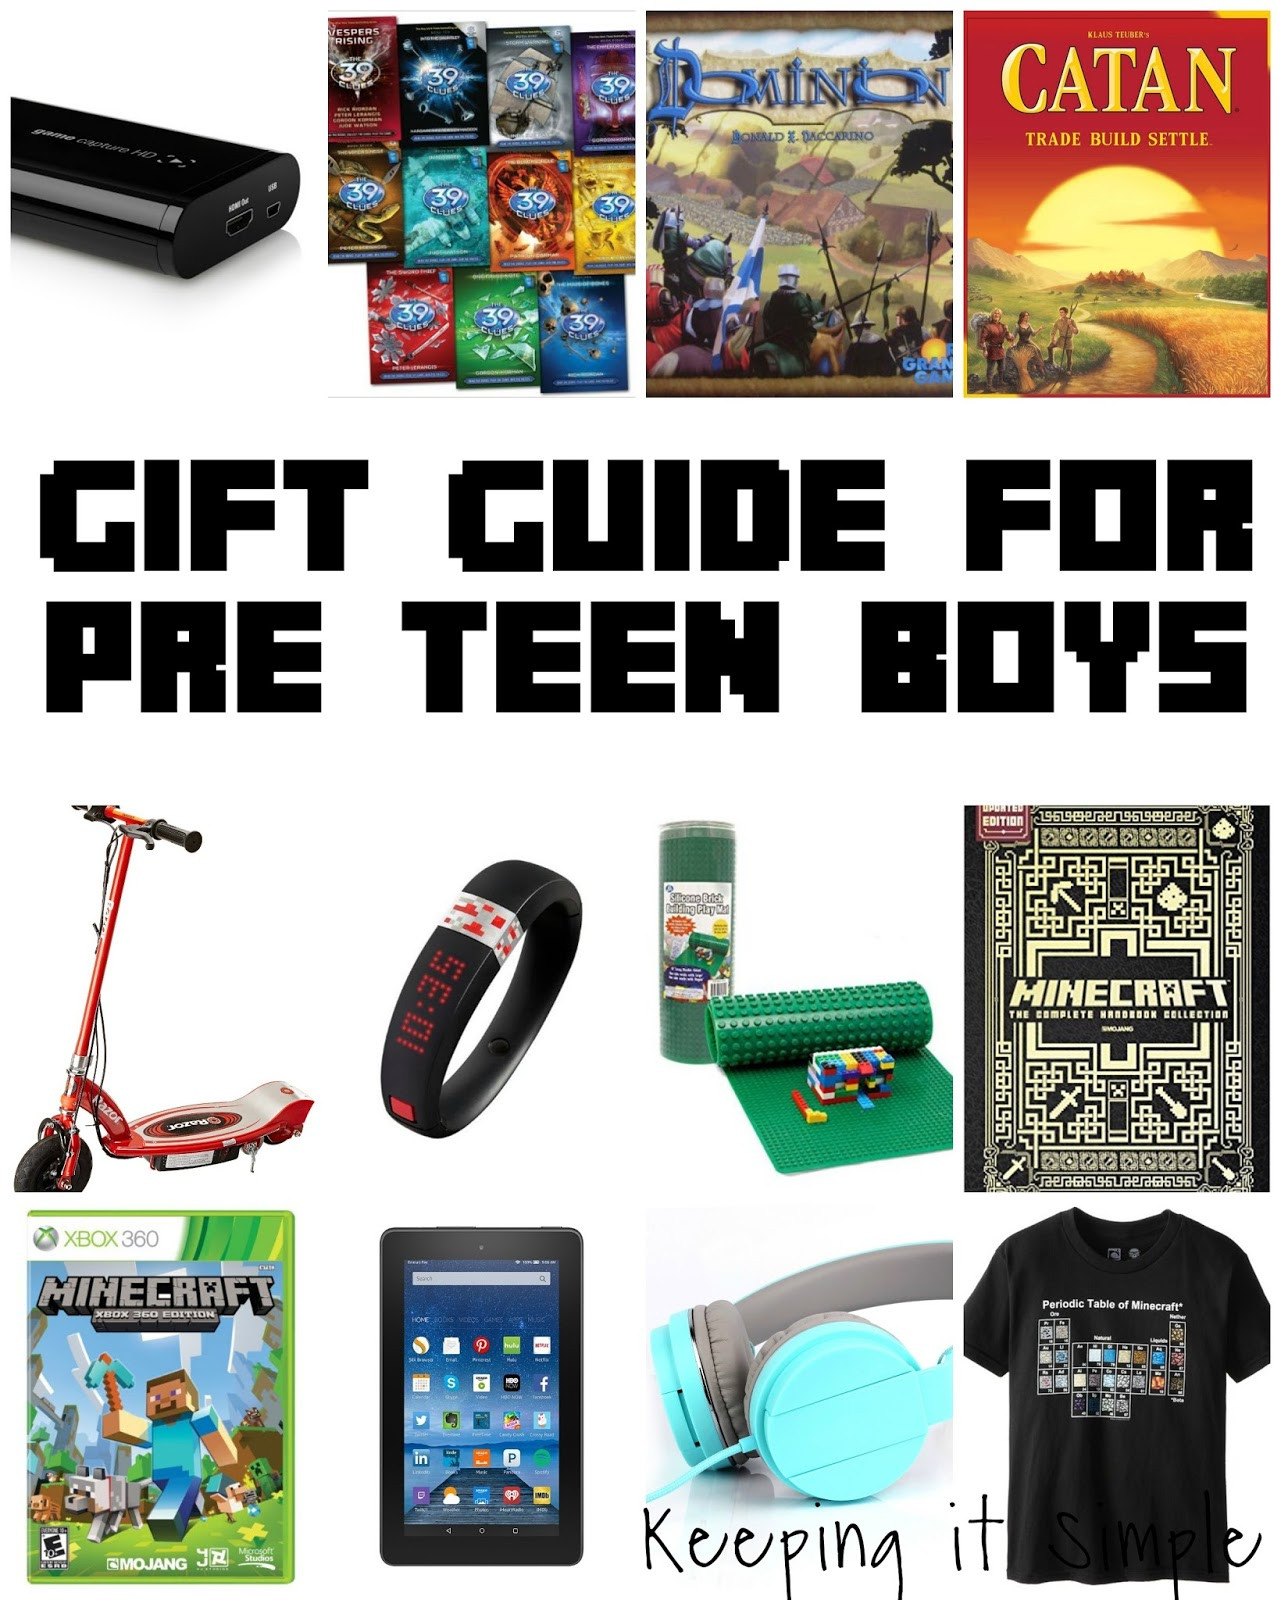 Gift Ideas For Young Boys
 Keeping it Simple Guide Gift for Pre Teen Boys and $100